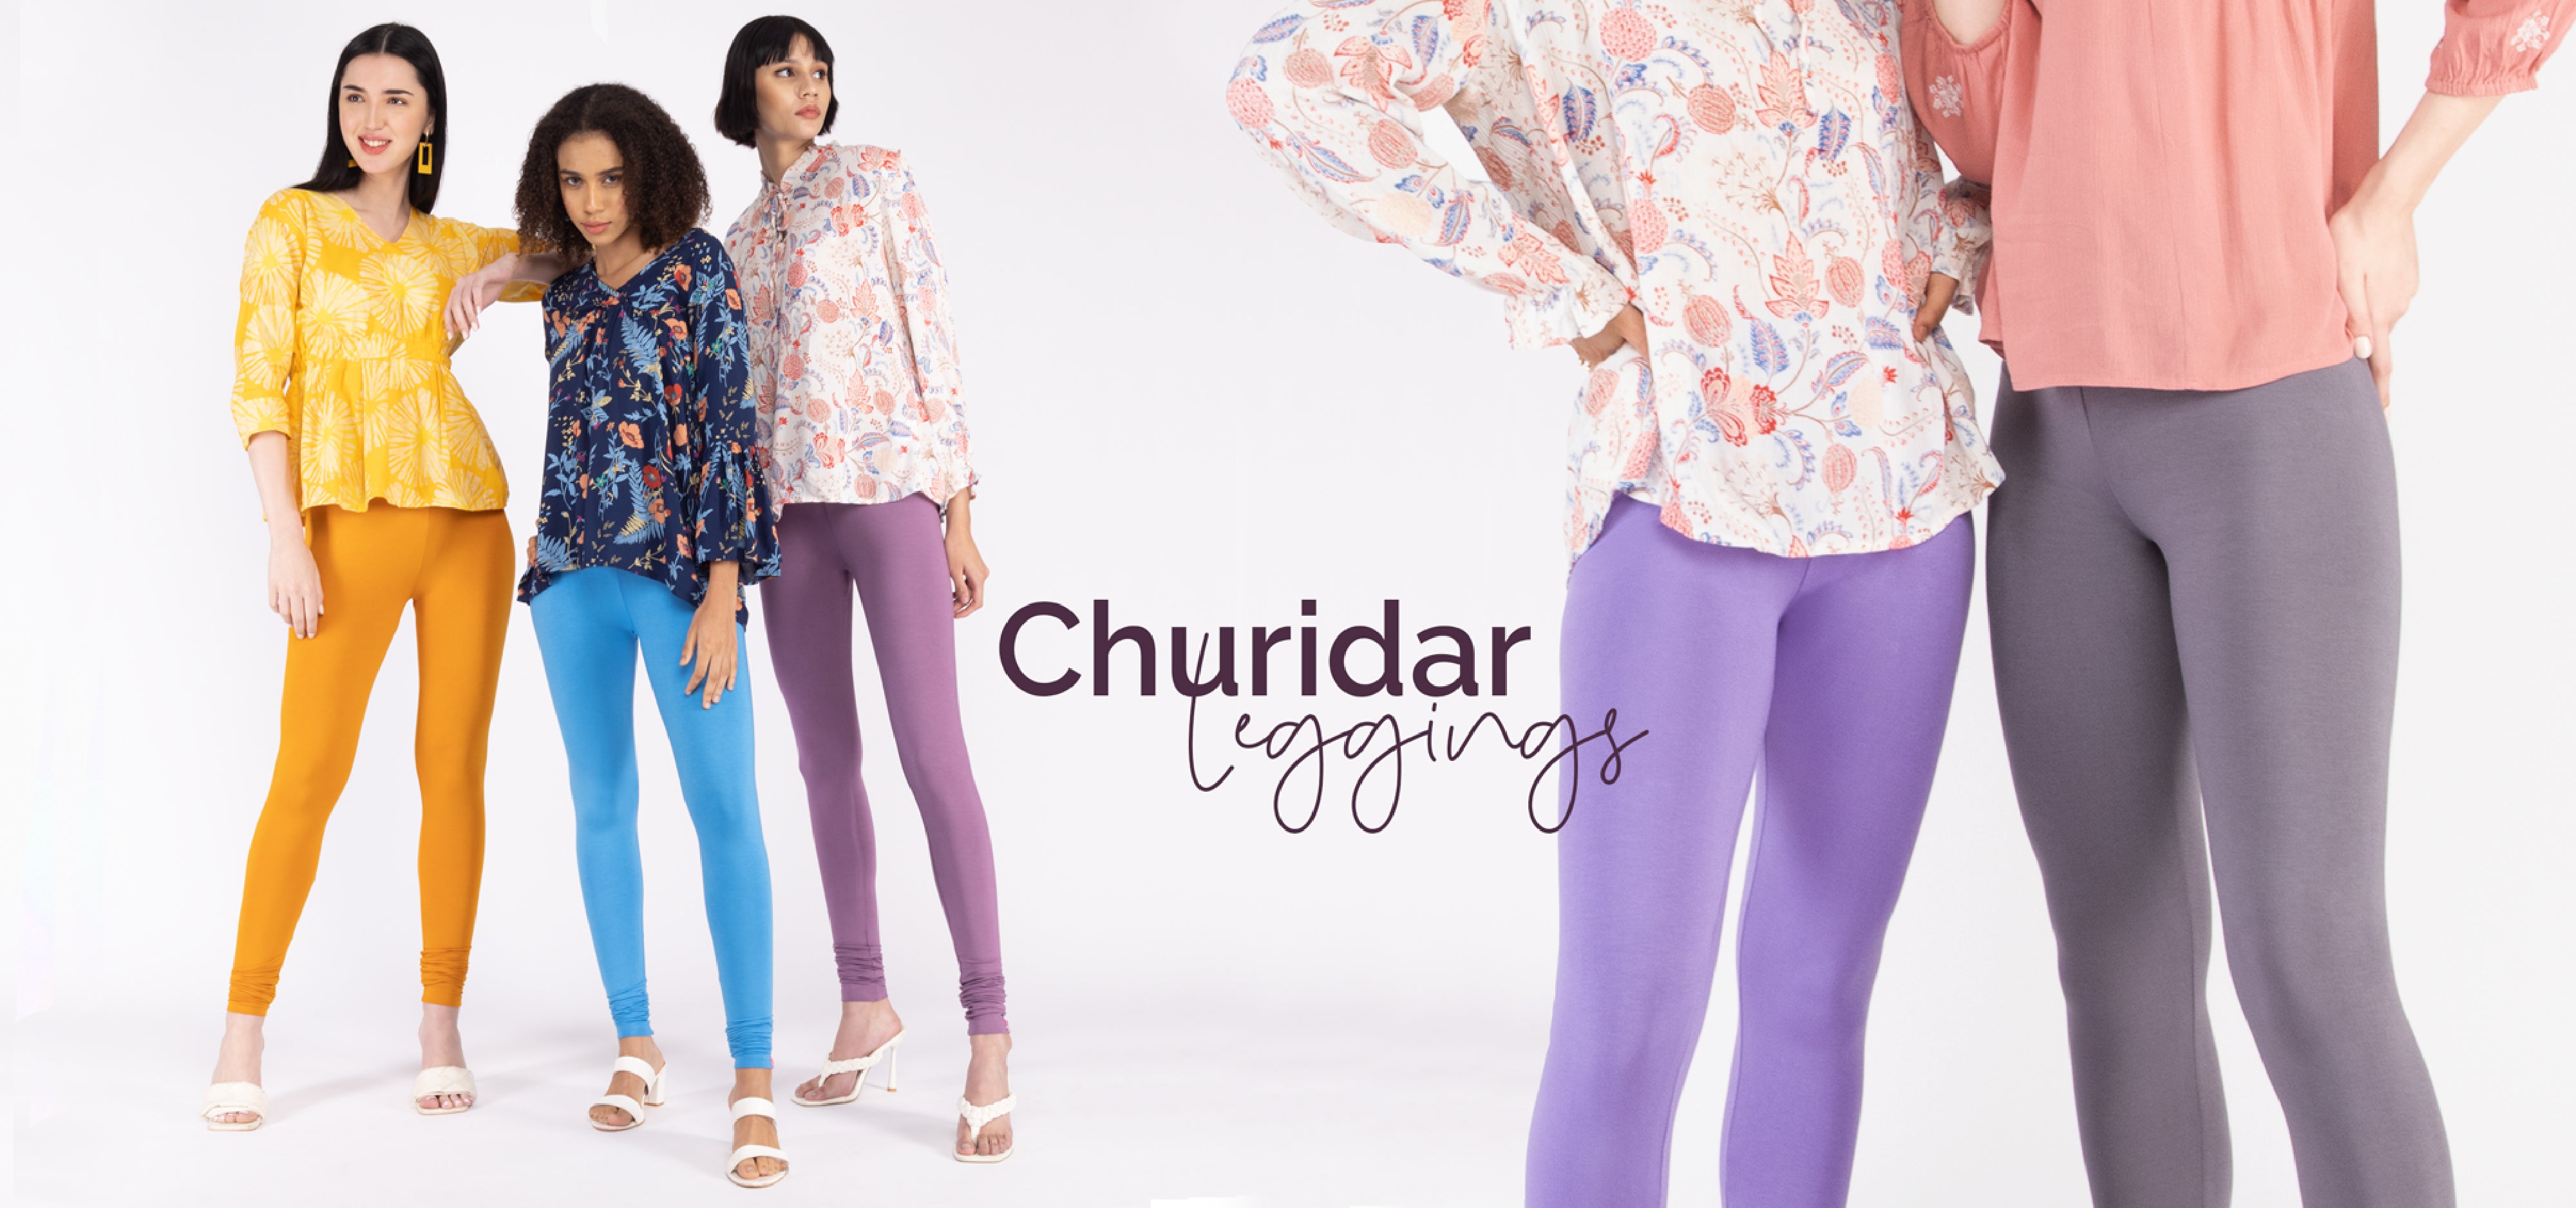 Premium AI Image | the girls are wearing colorful leggings and the words  quot the word quot on them